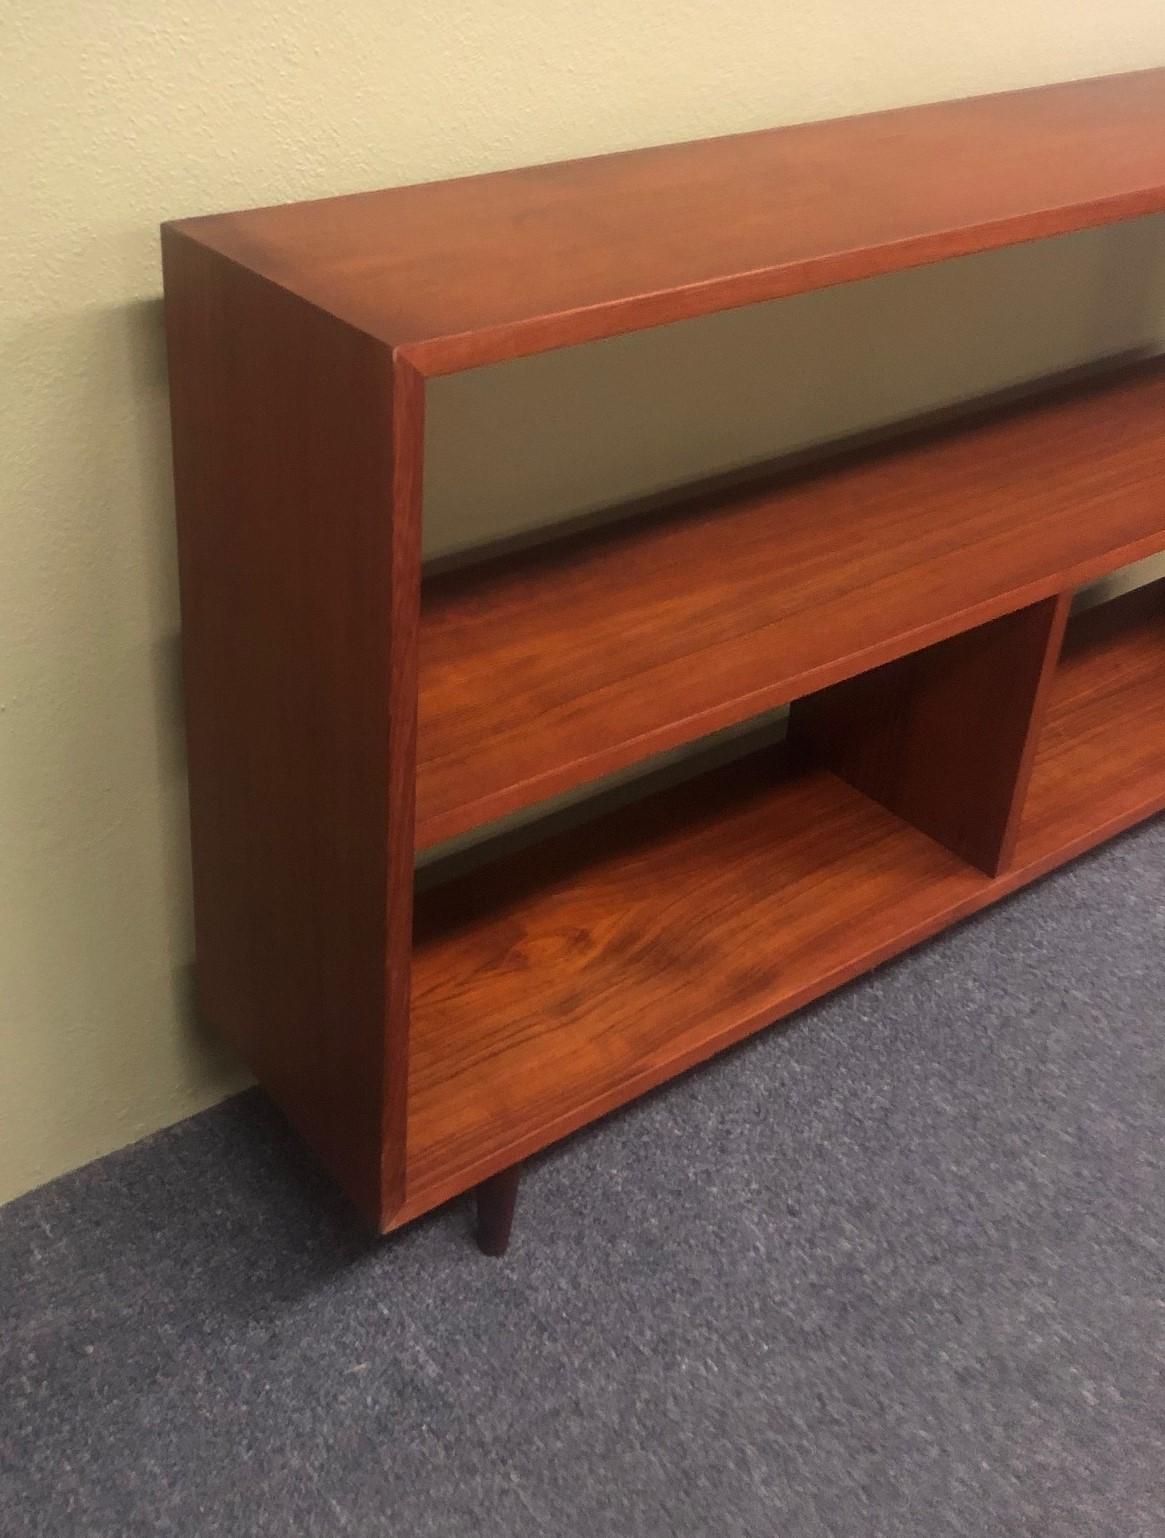 20th Century Mid-Century Modern Backless Low Profile Teak Bookcase with Tapered Legs